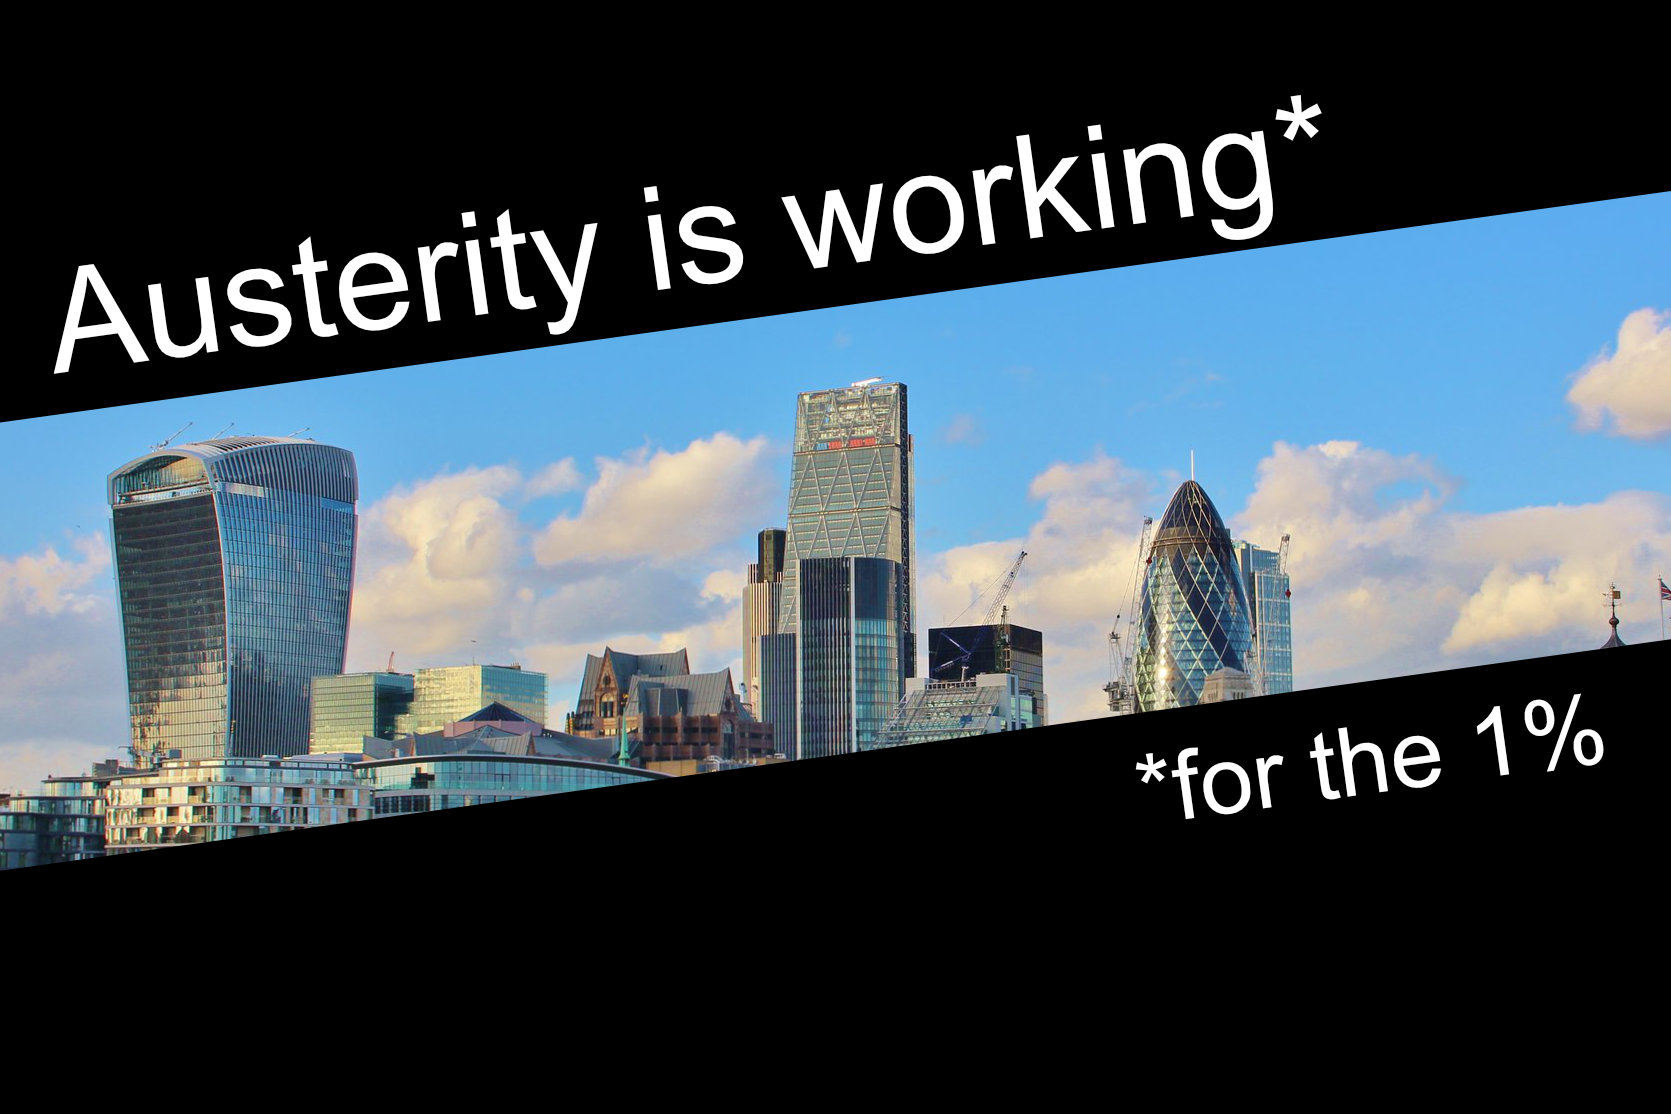 Austerity is working... for the 1%